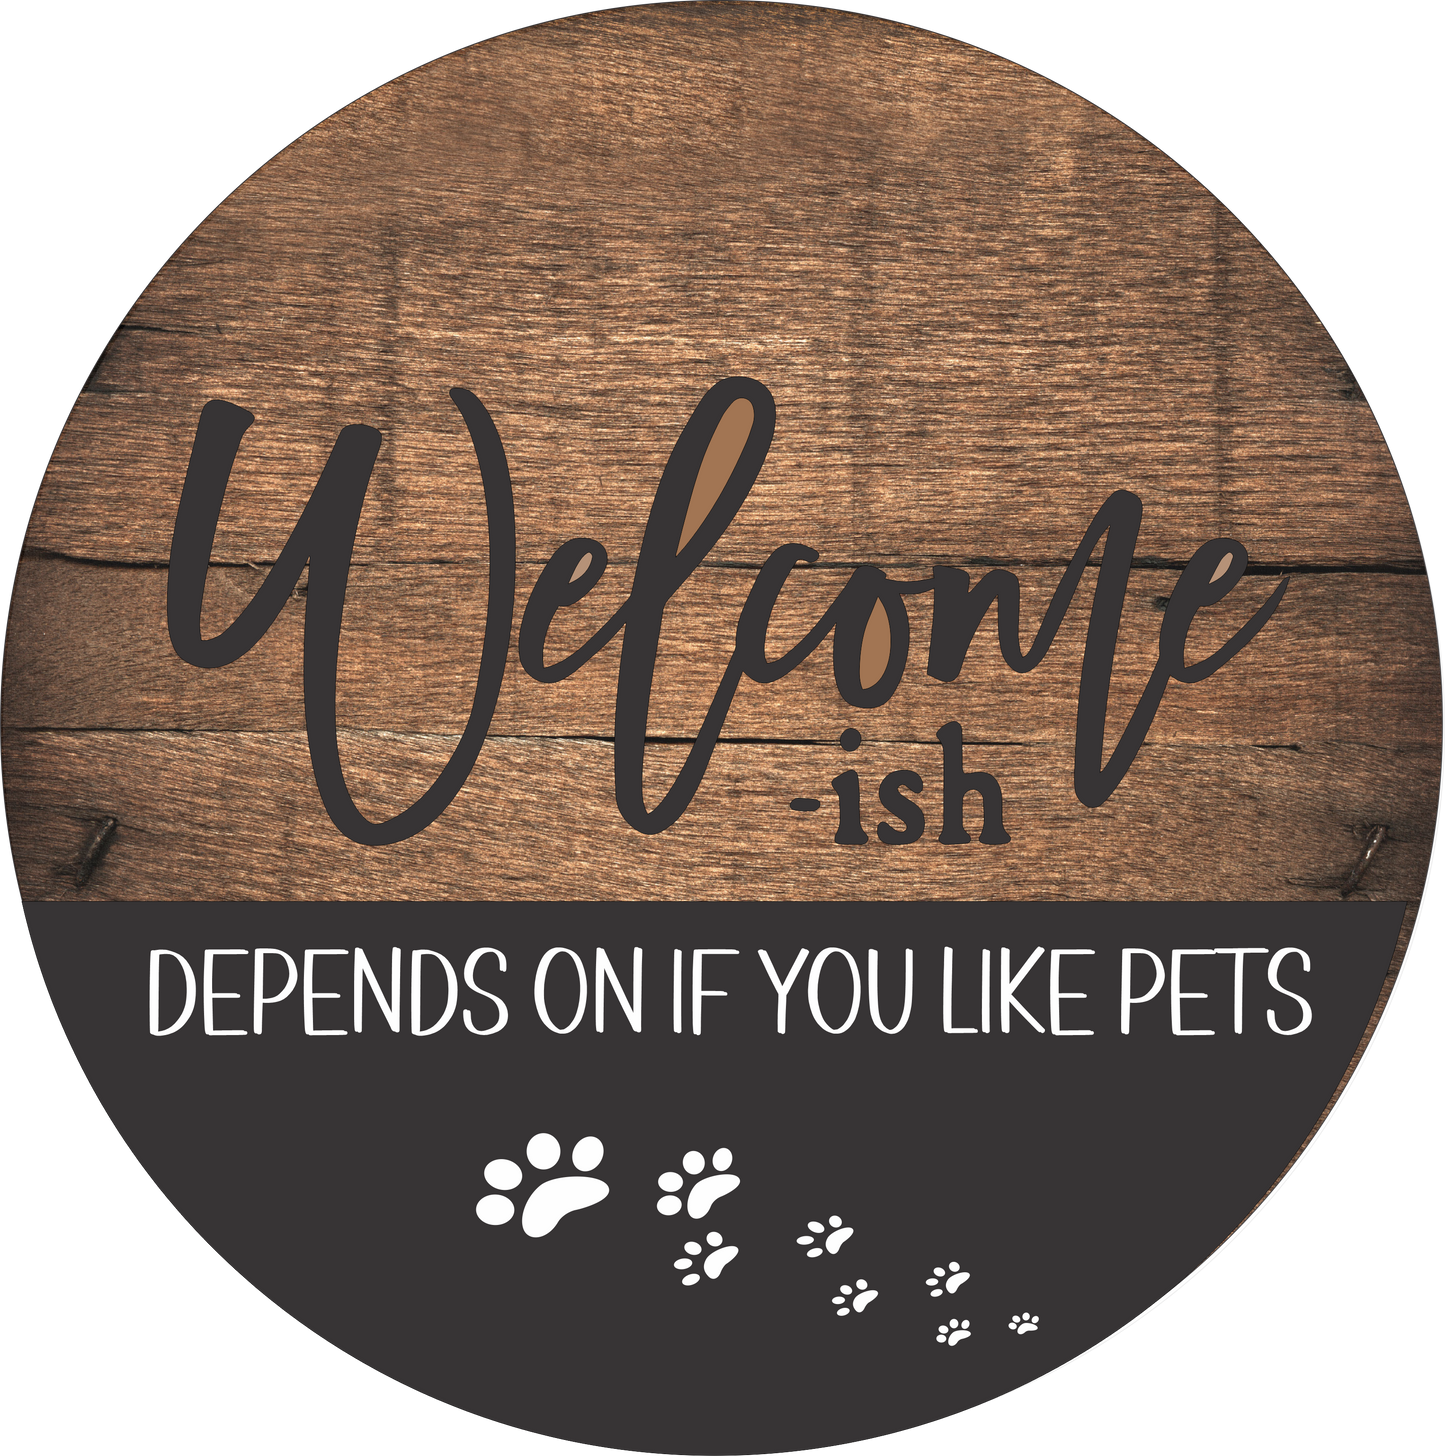 Welcome-ish depends on if you like pets Sign